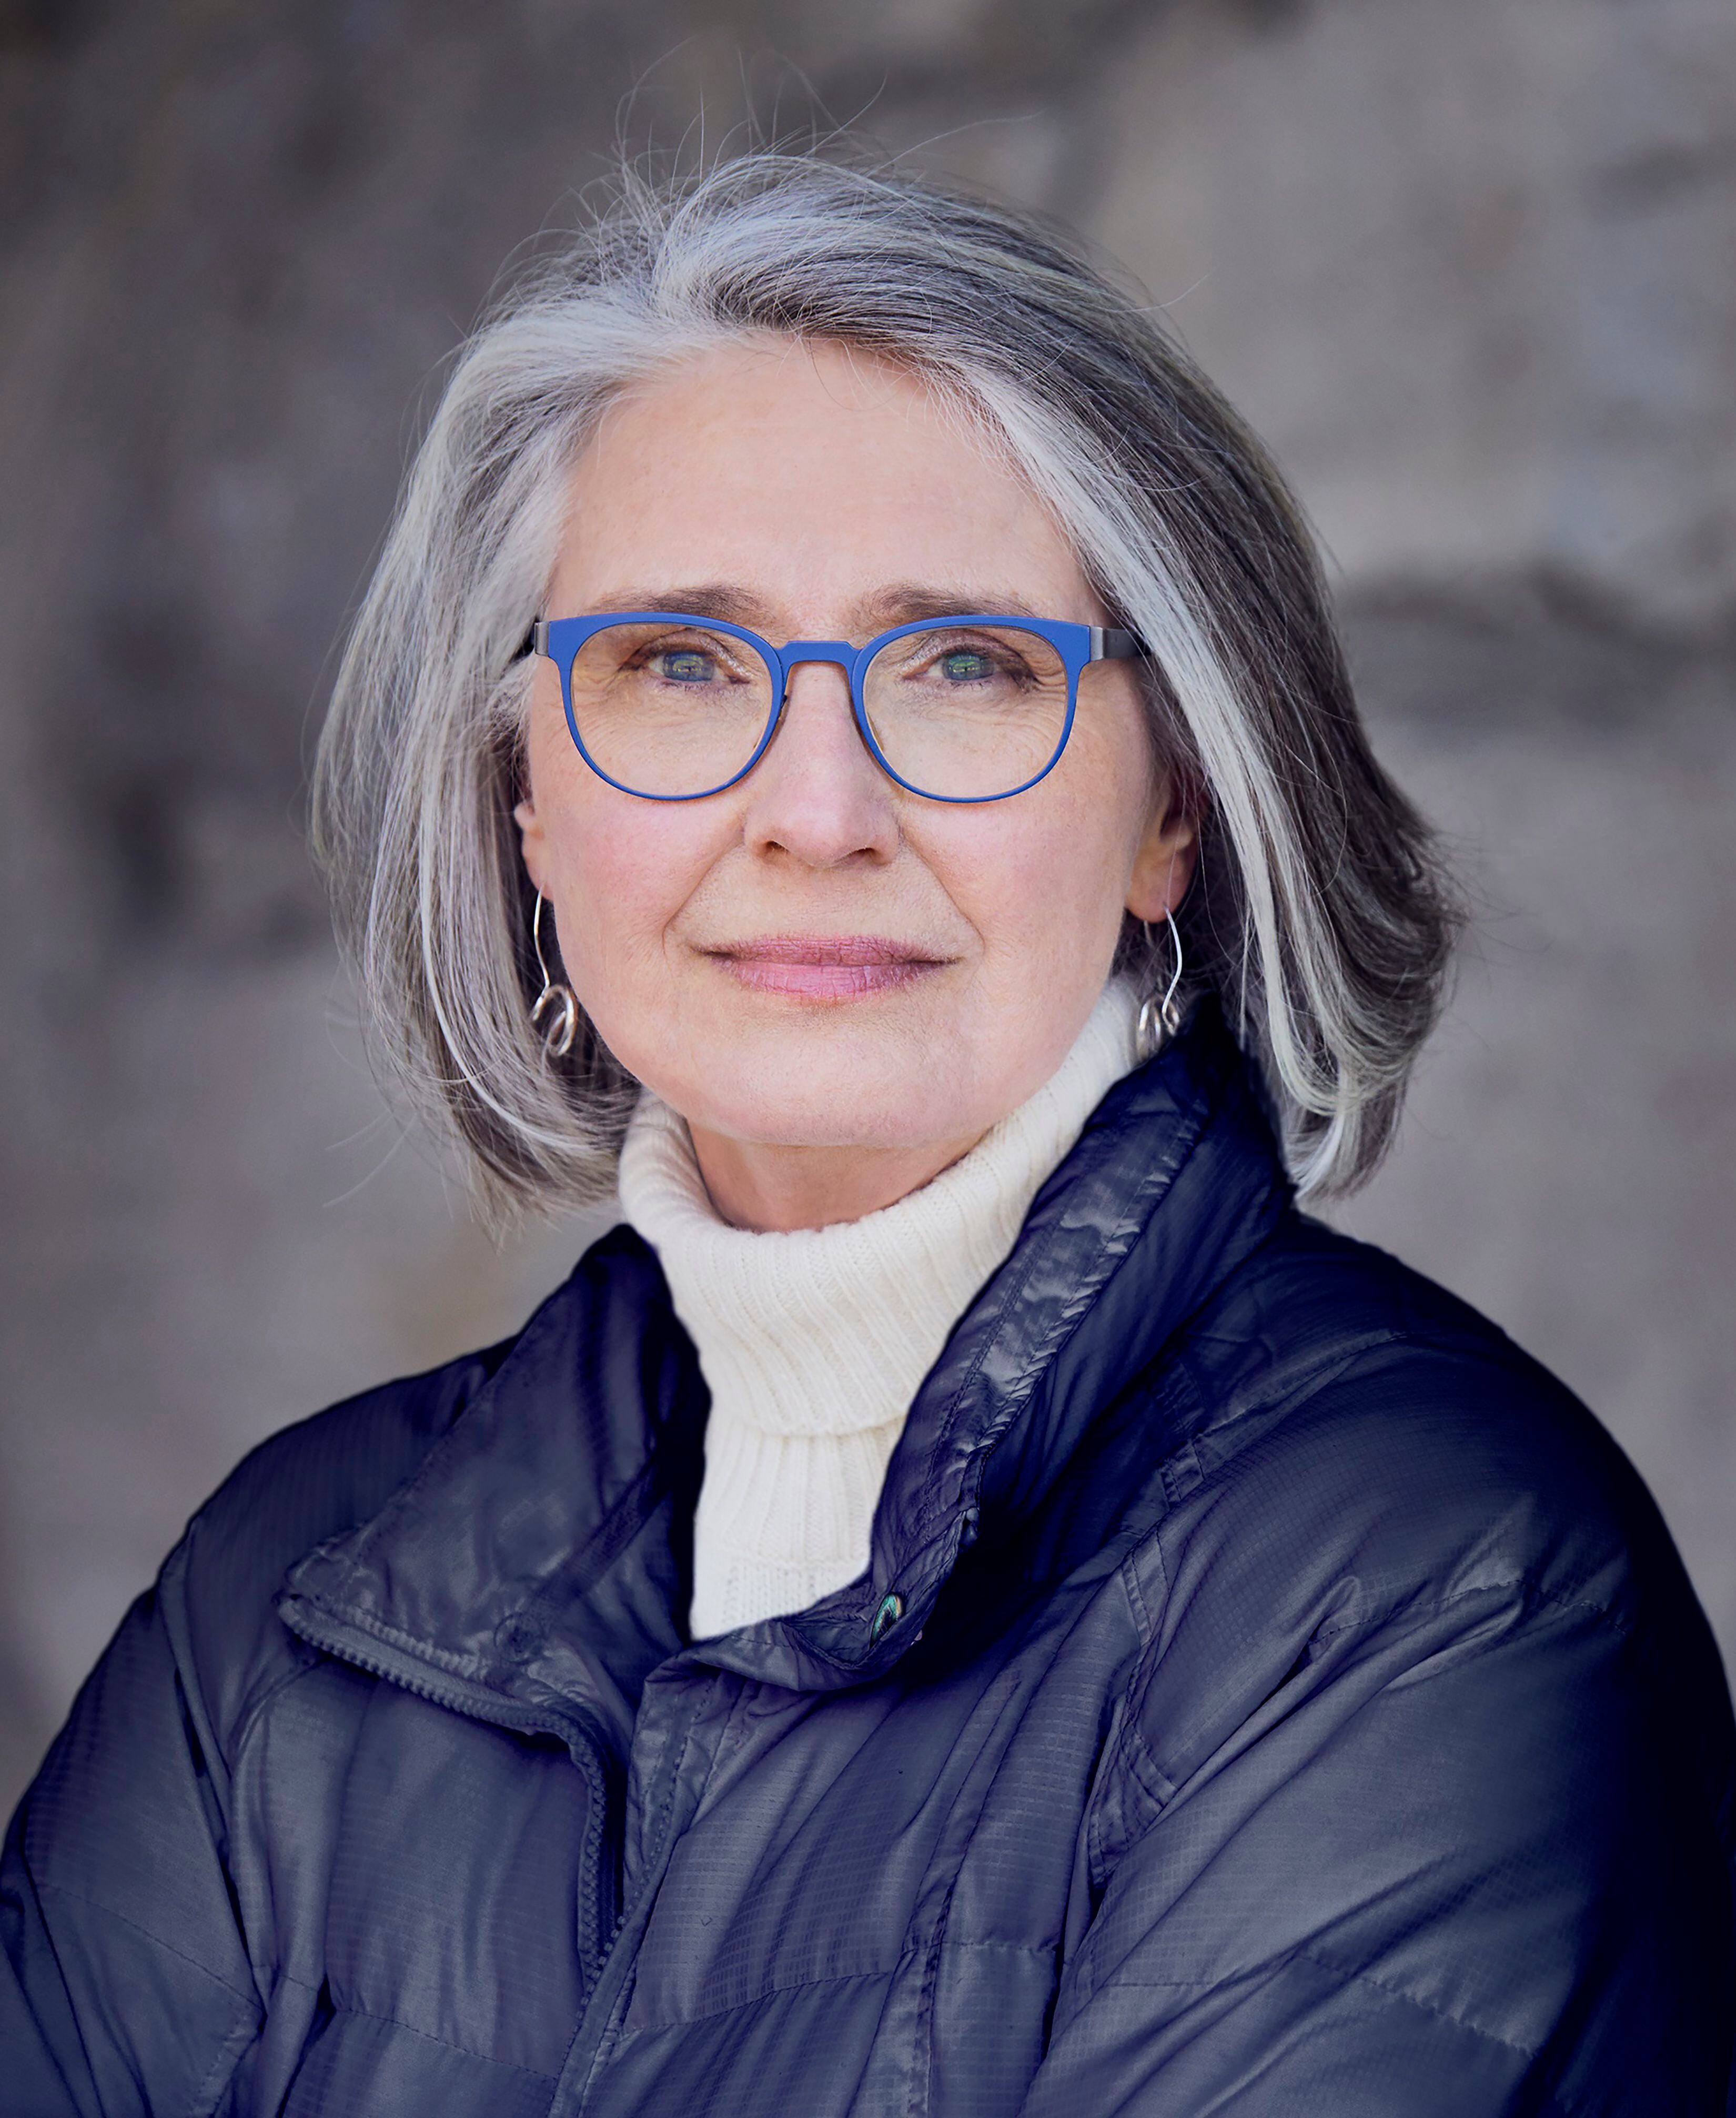 Author Louise Penny gets very personal about her husband's death